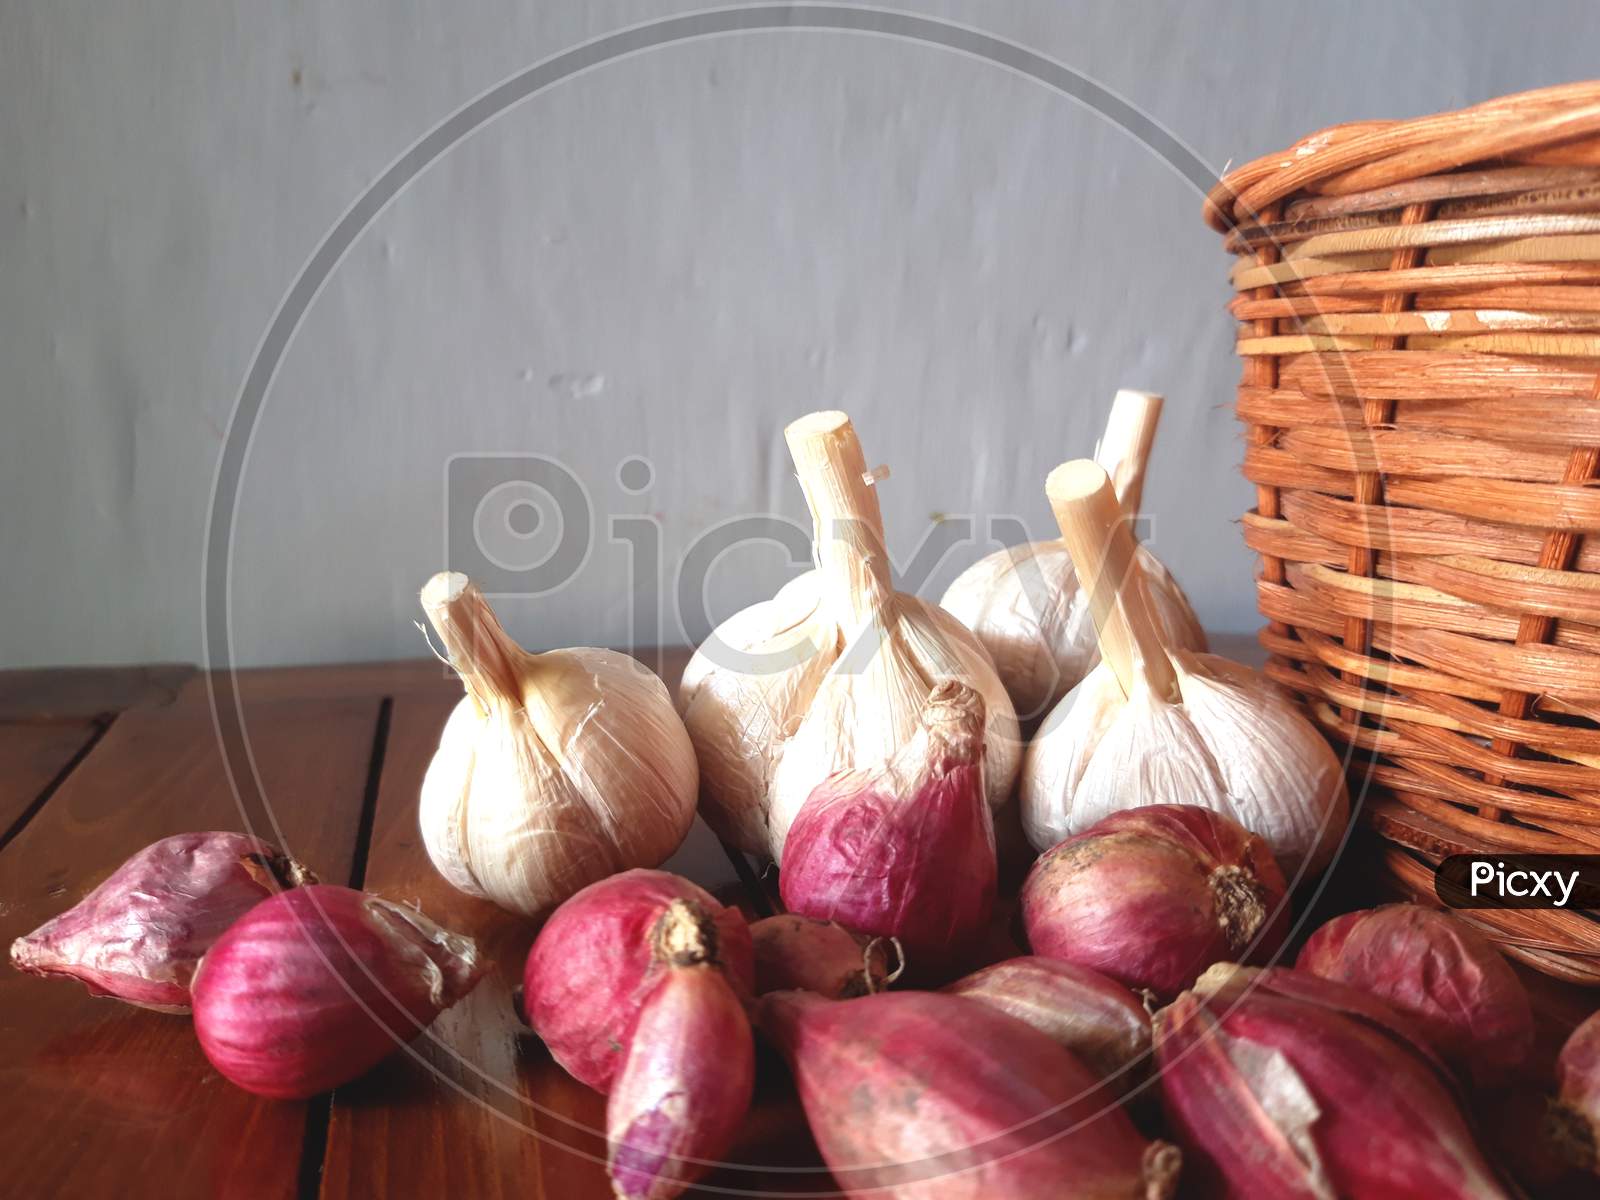 Garlic and onion are scattered on a wooden board